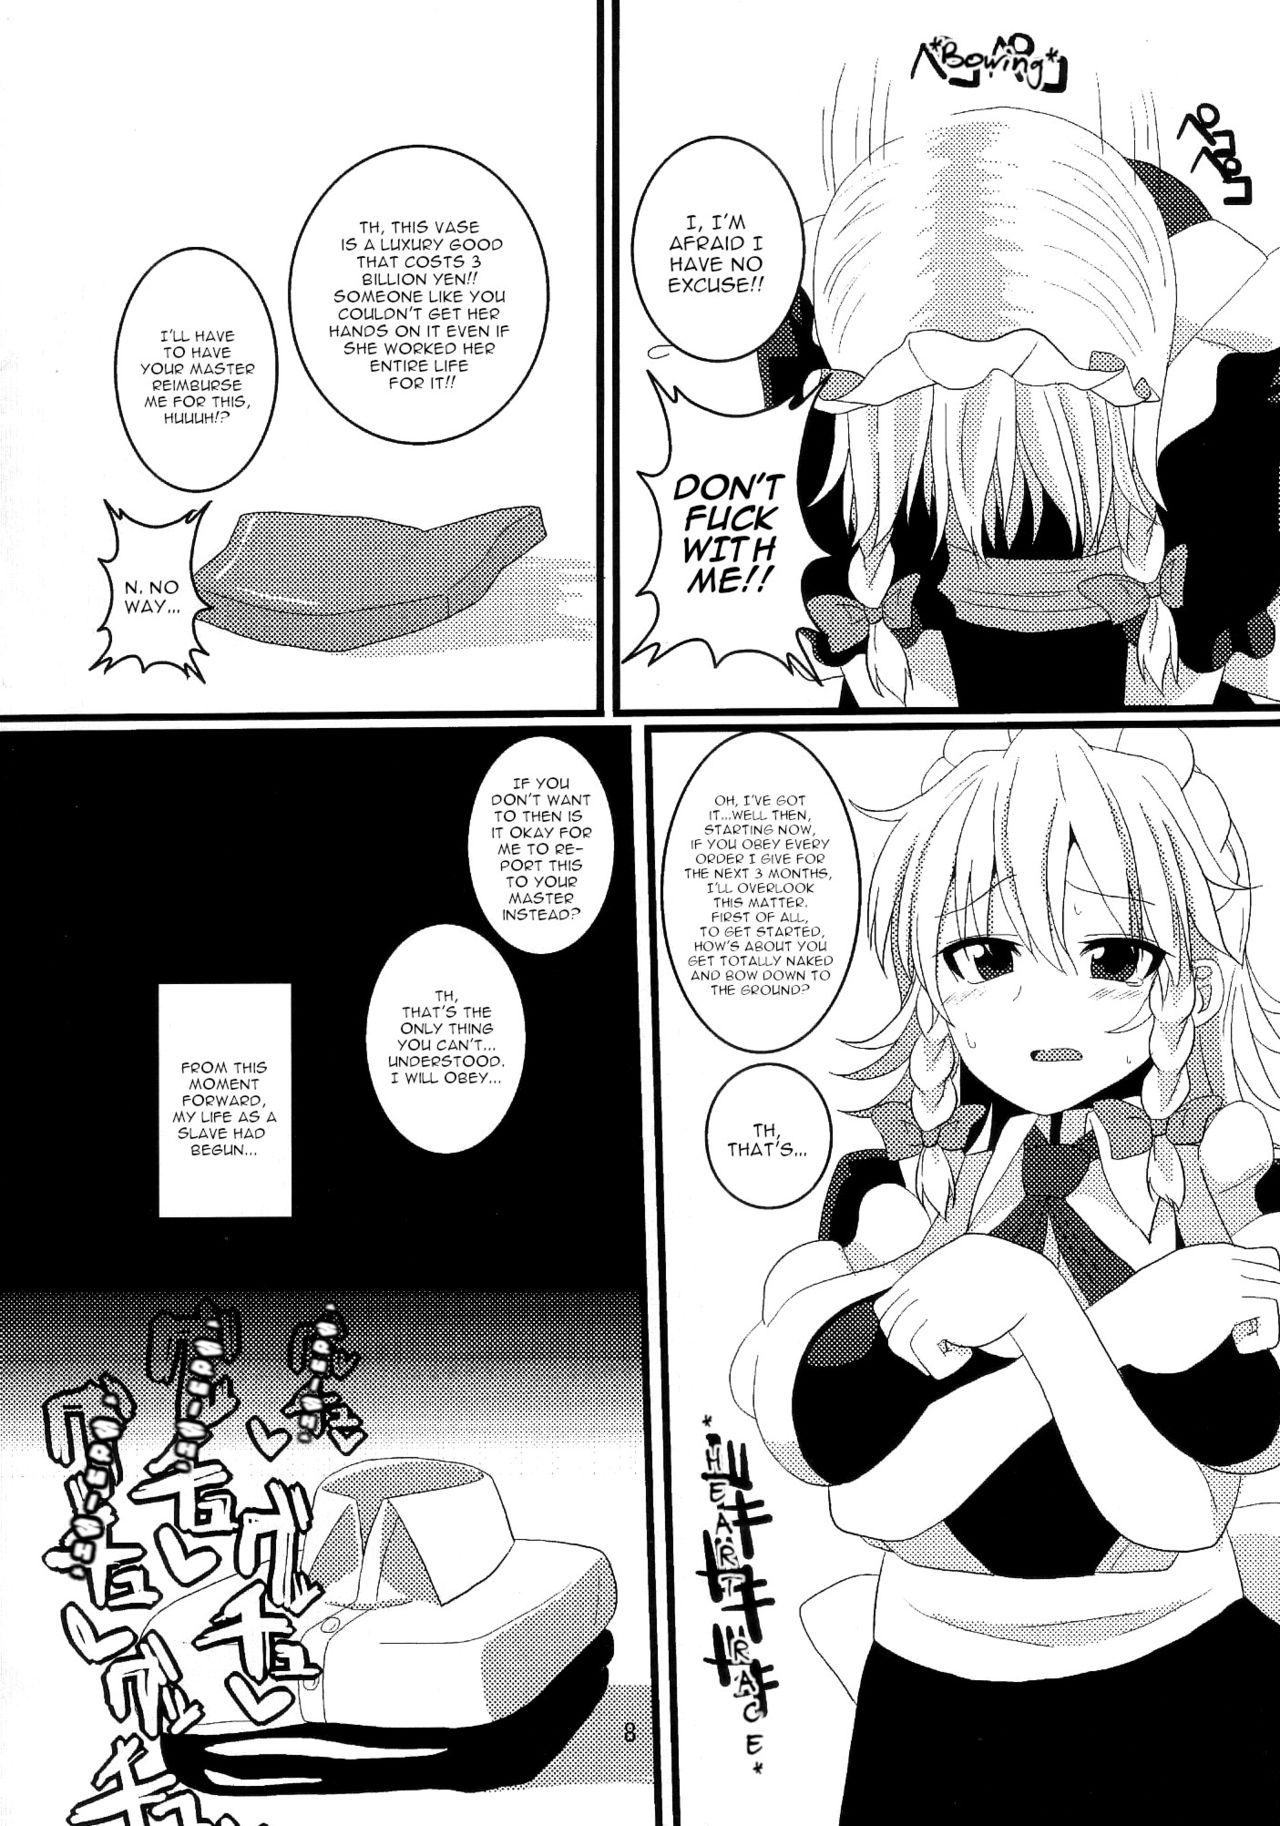 Best Dogeza Maid - Touhou project Bro - Page 8